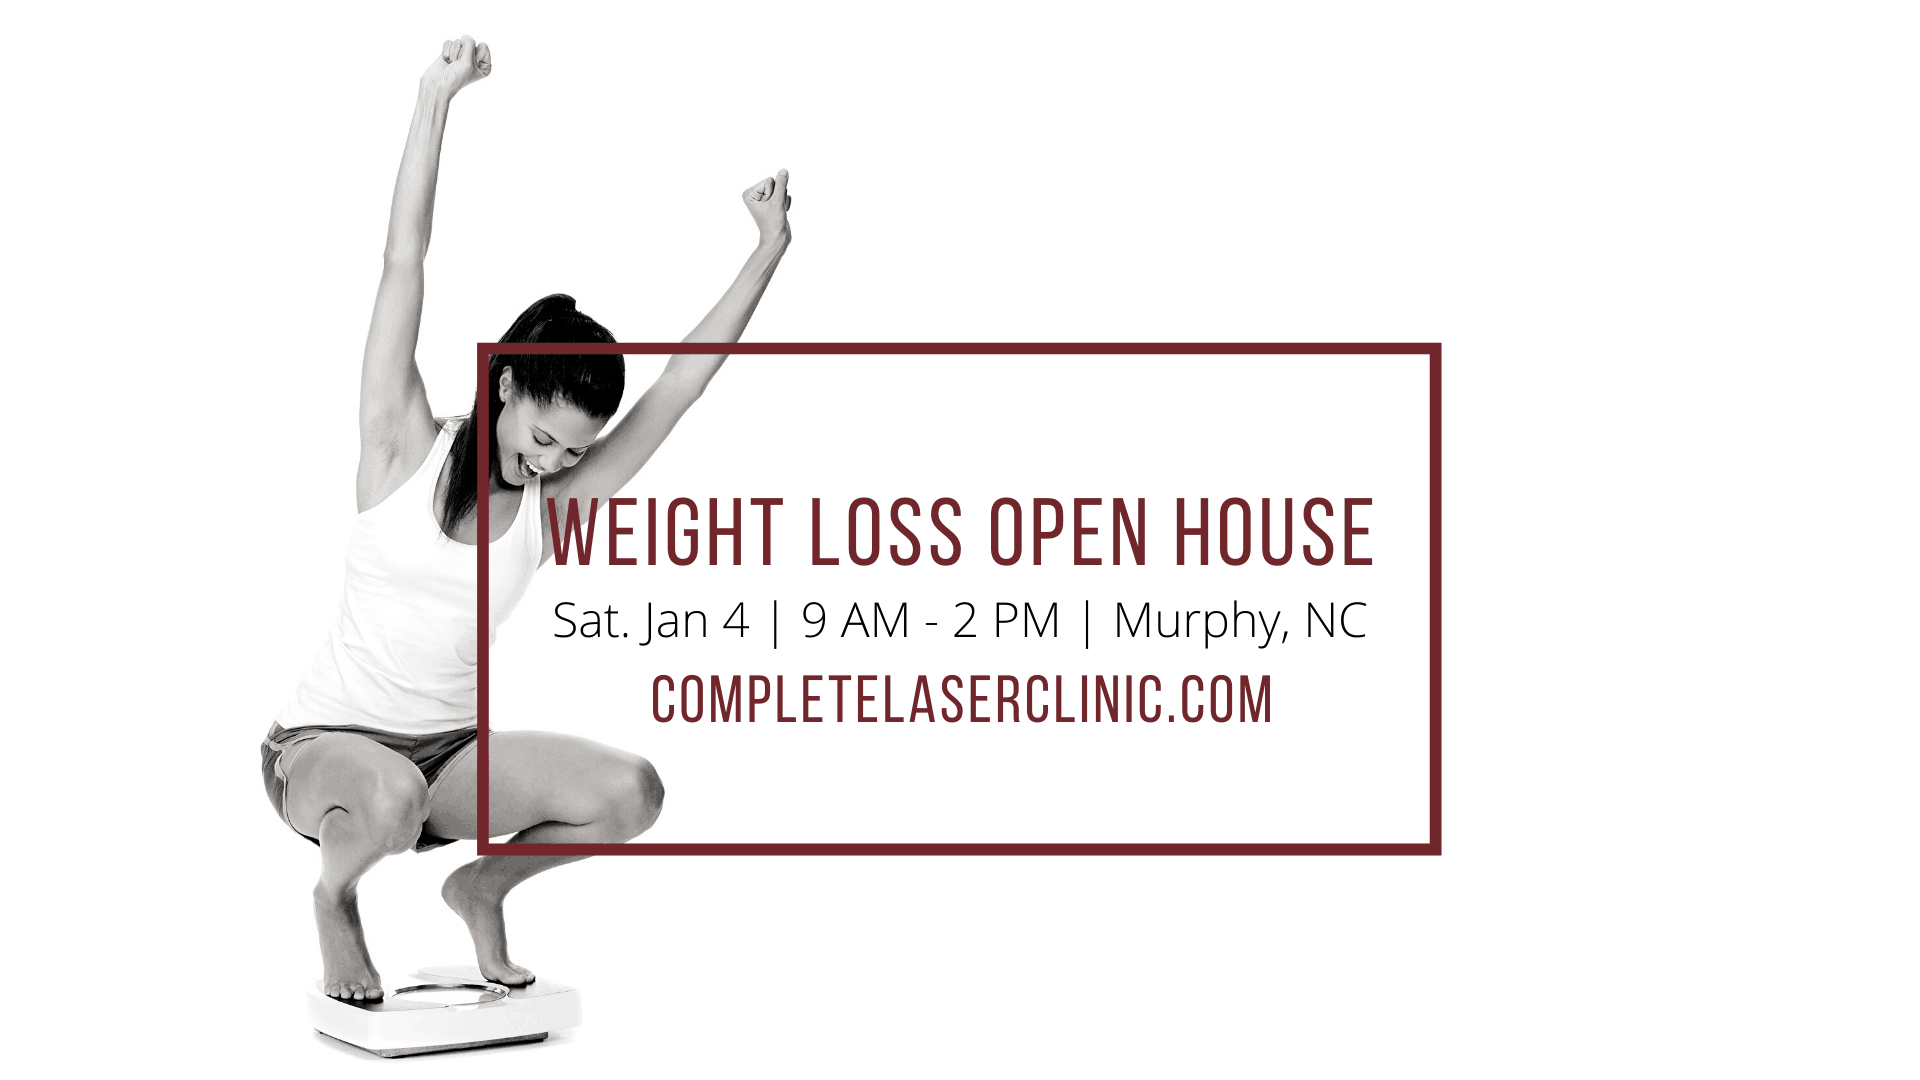 WEIGHT LOSS OPEN HOUSE